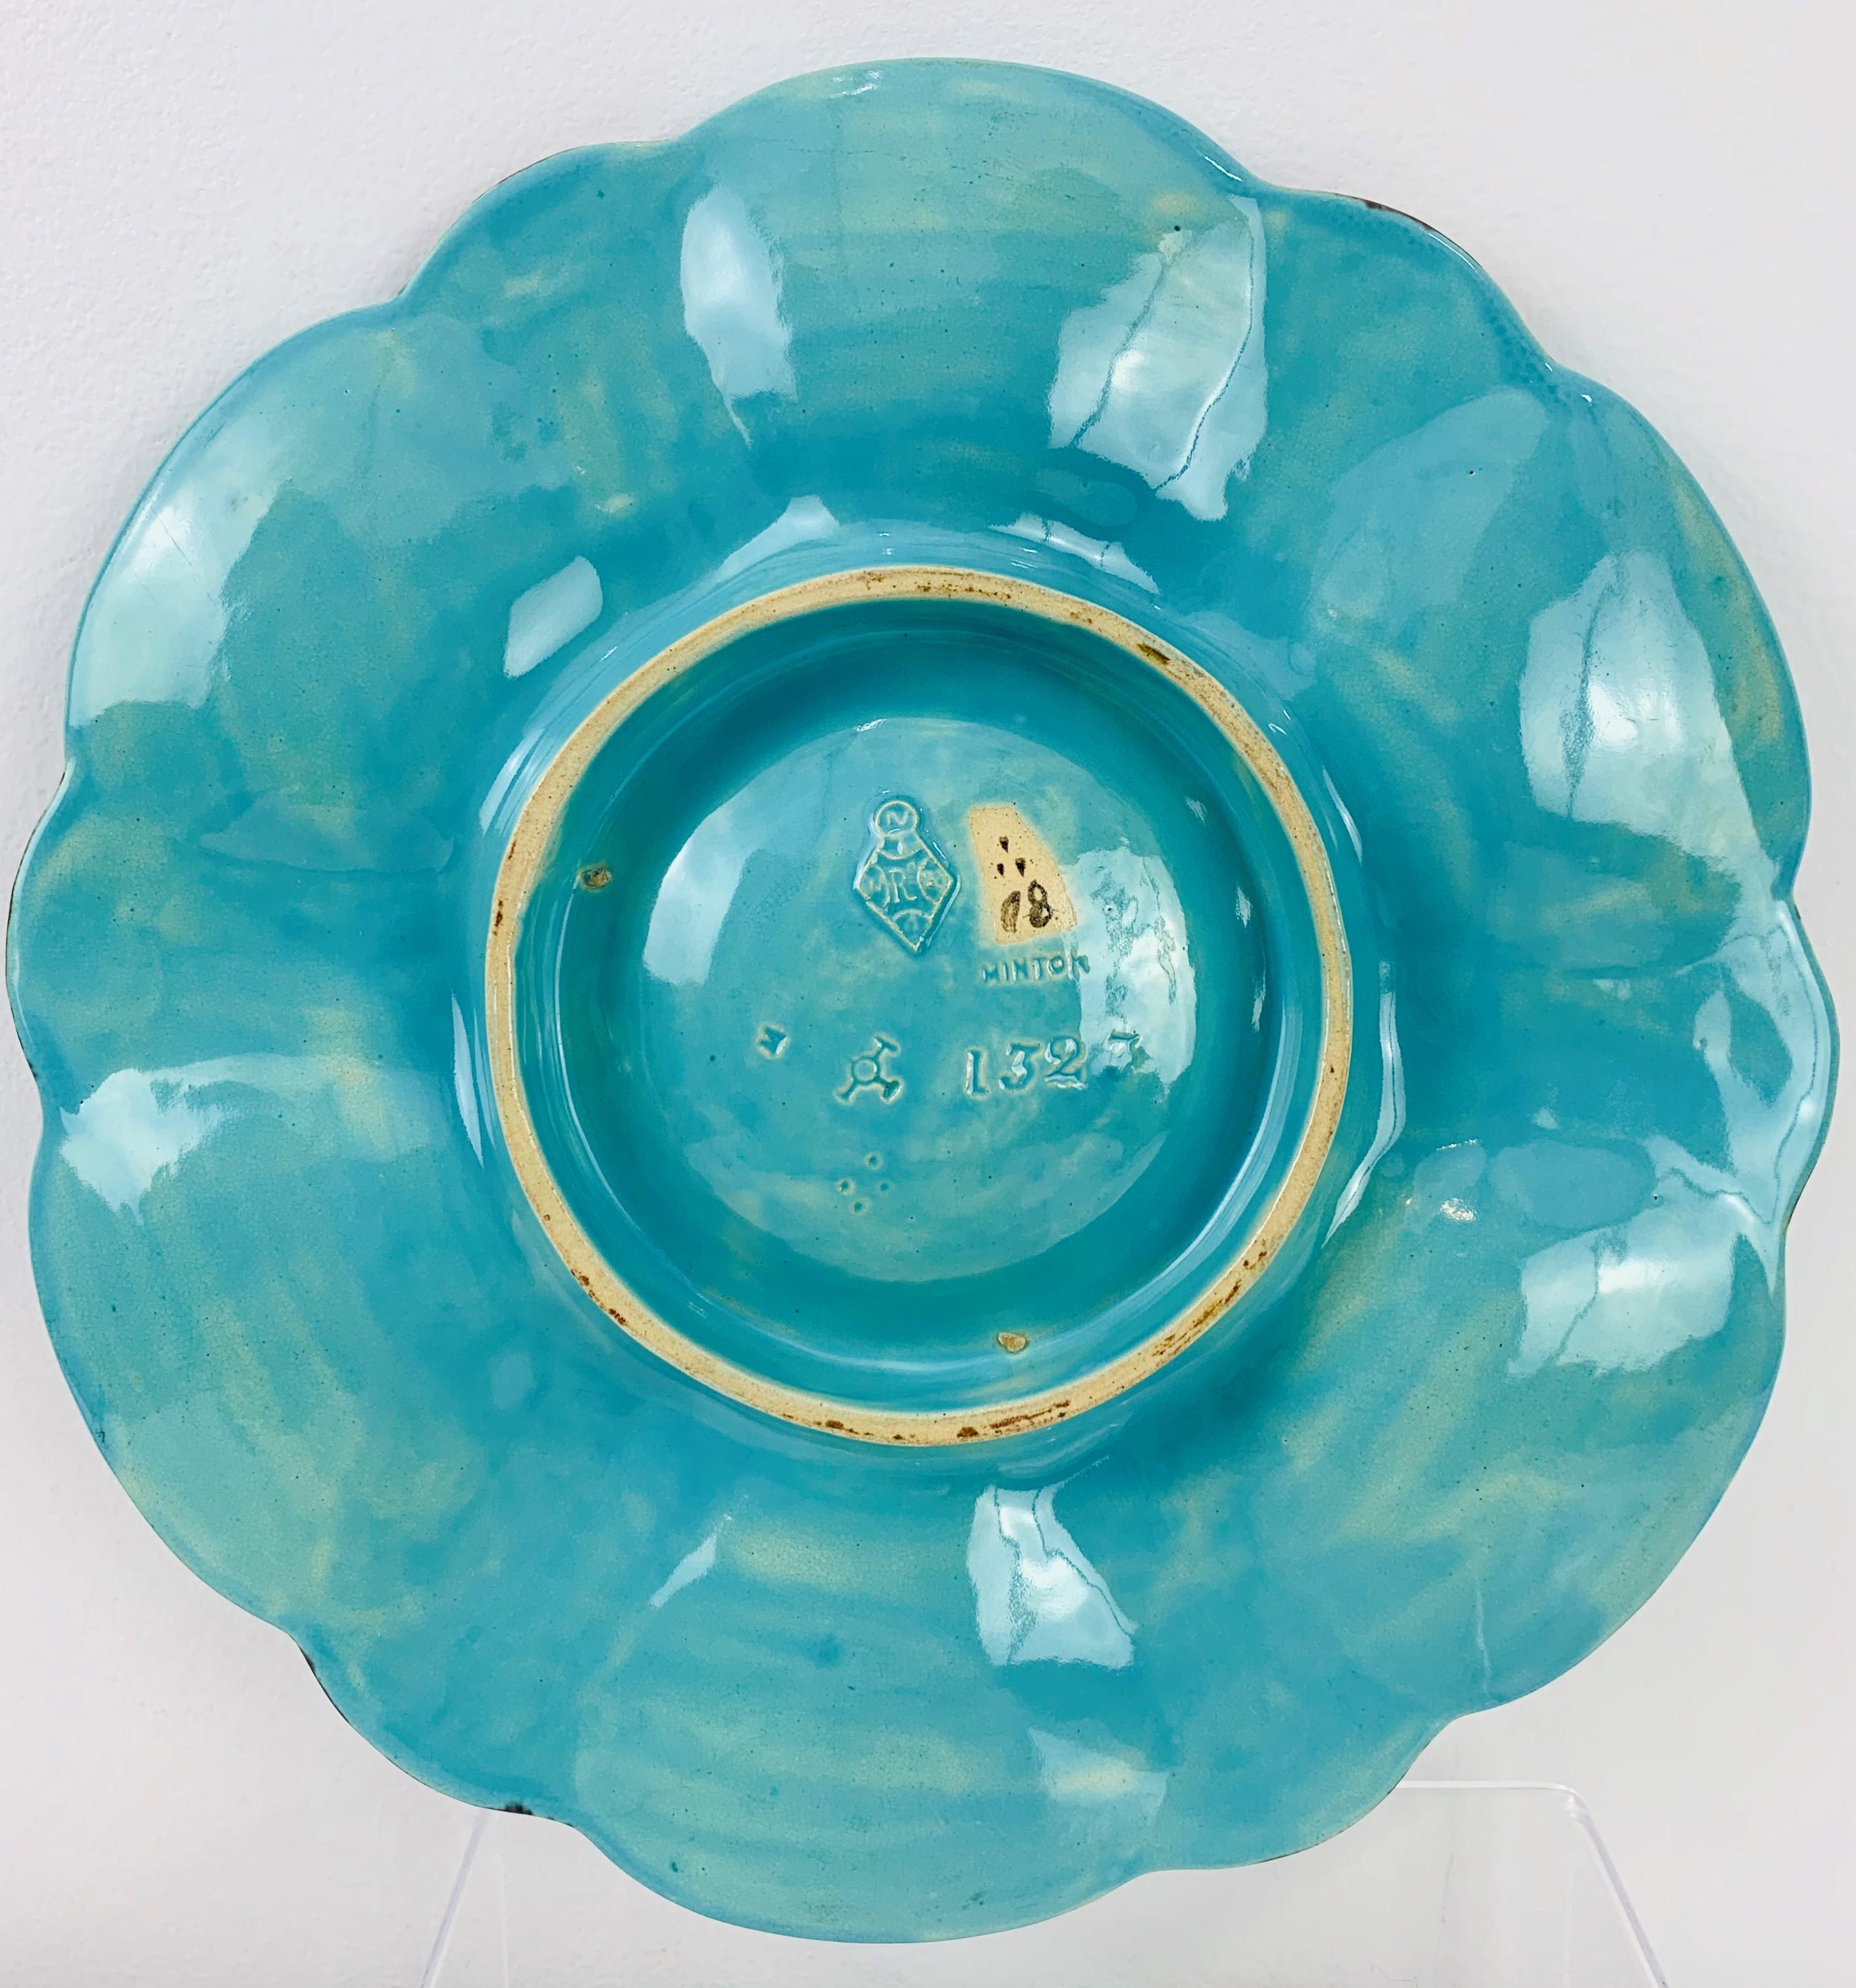 Late 19th Century Minton Majolica Turquoise Six Well Oyster Plate, English, Dated 1873